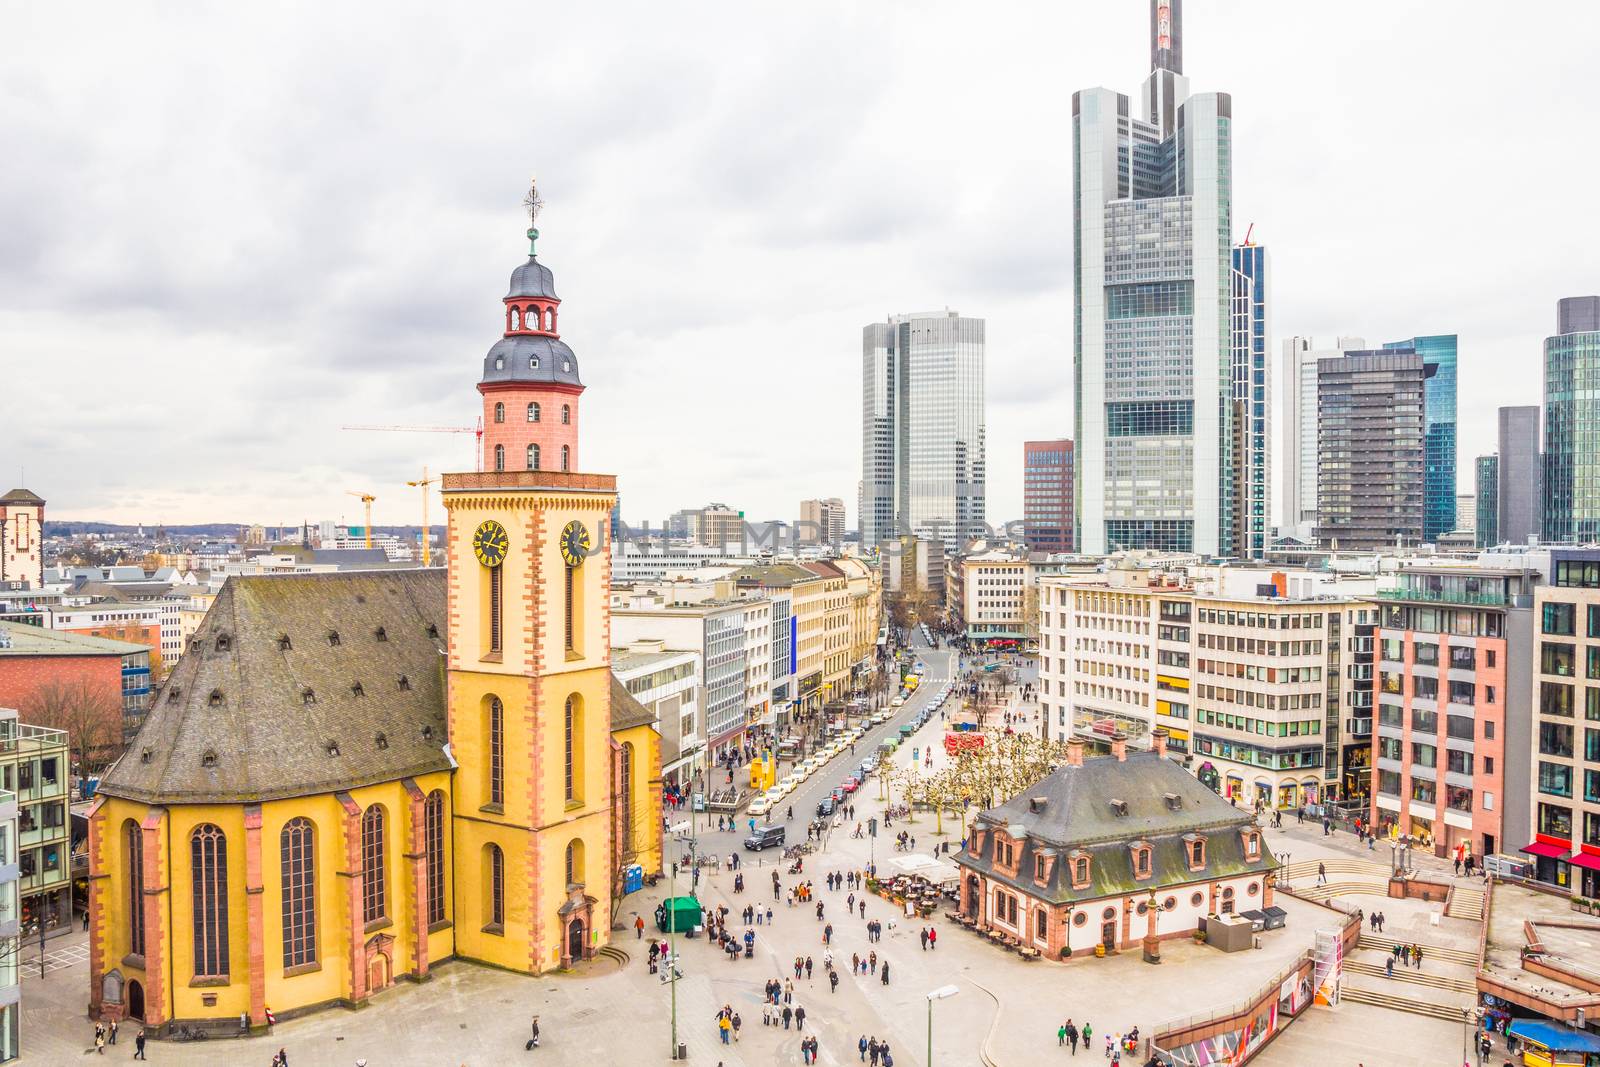 Skyline of Frankfurt with Hauptwache and the plaza